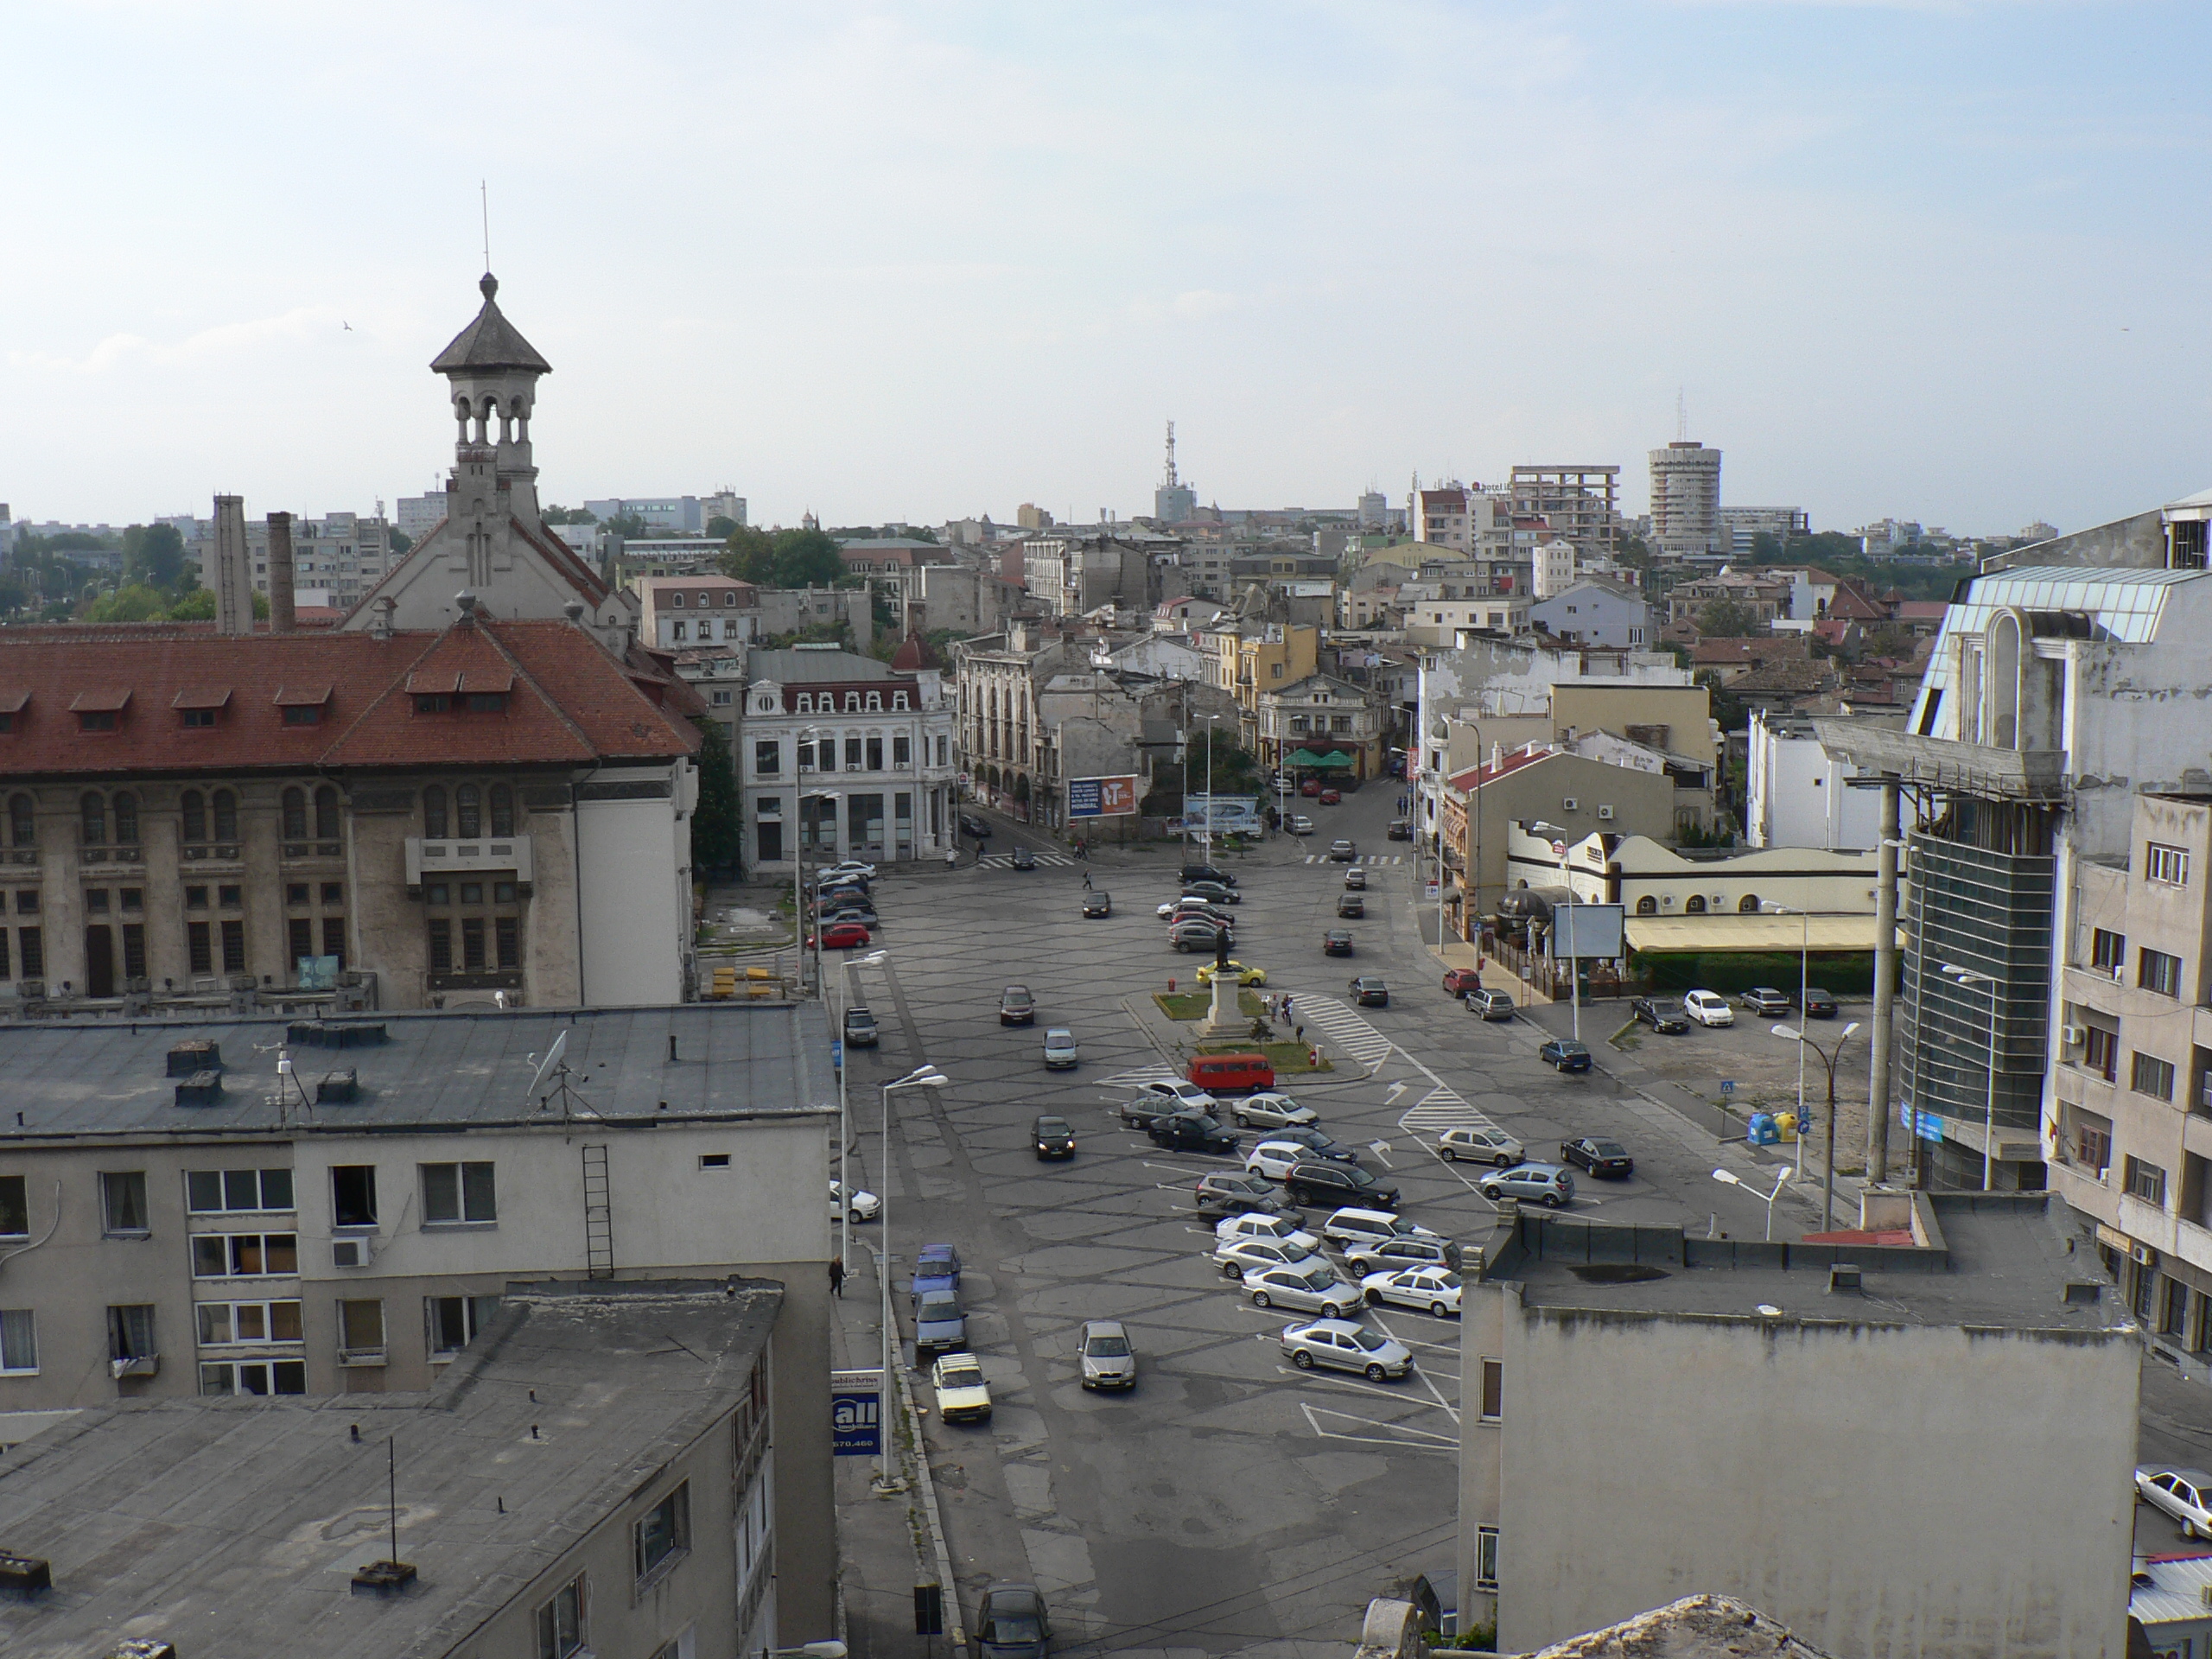 File:Constanta, view from mosque 3.jpg - Wikimedia Commons